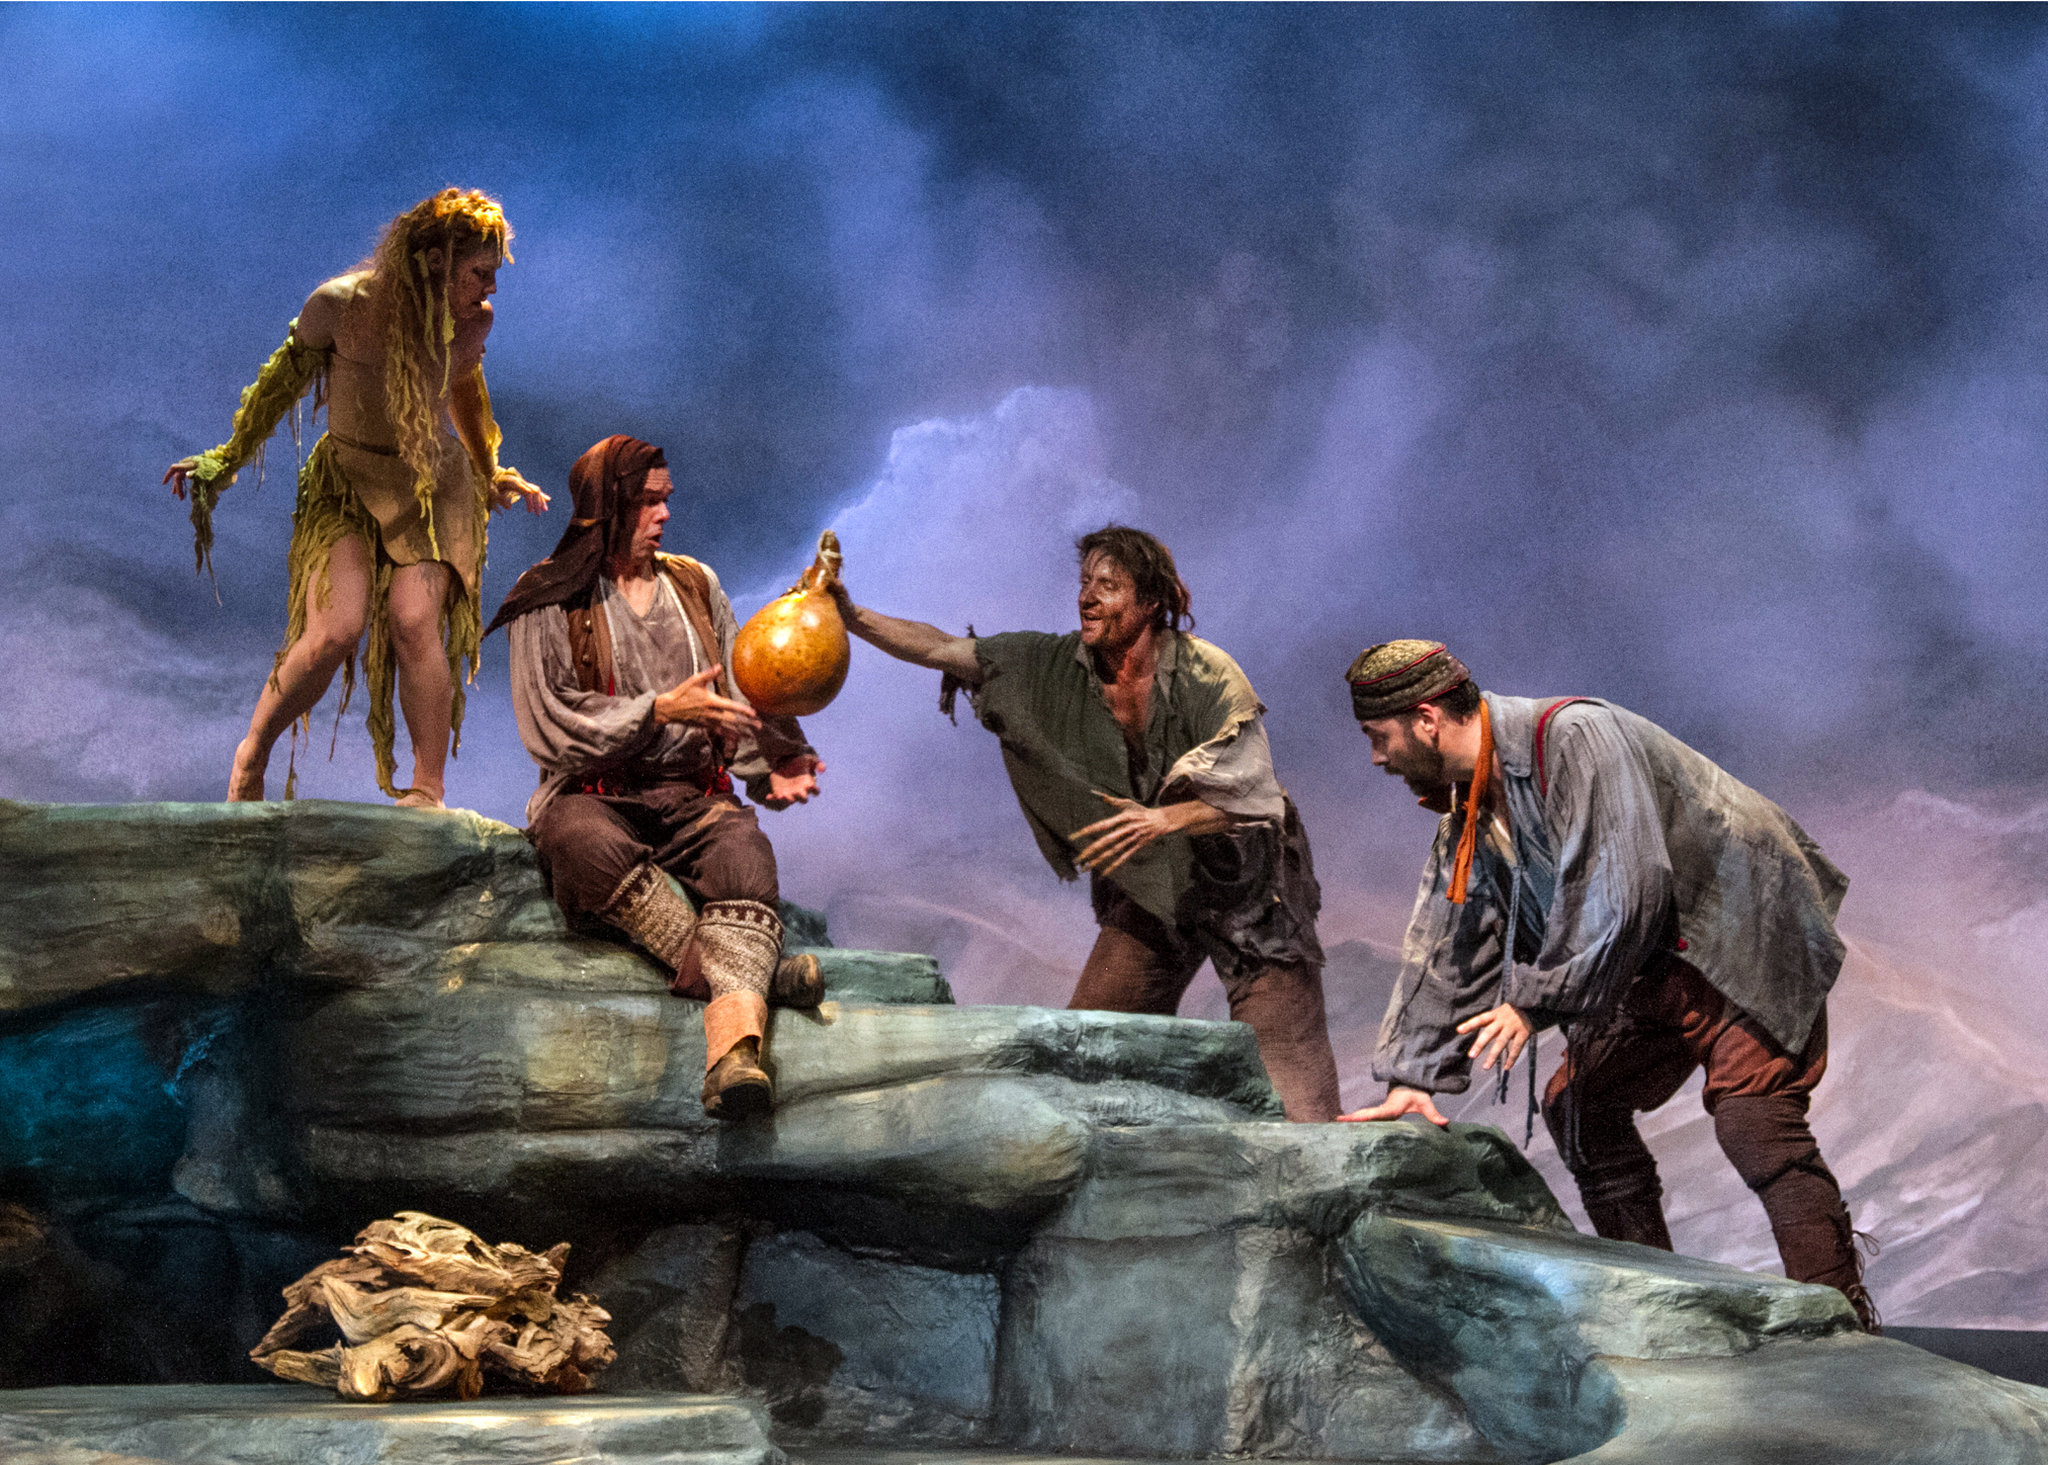  New York Times, The. "The Tempest” at the F. M. Kirby Shakespeare Theater. 2021.